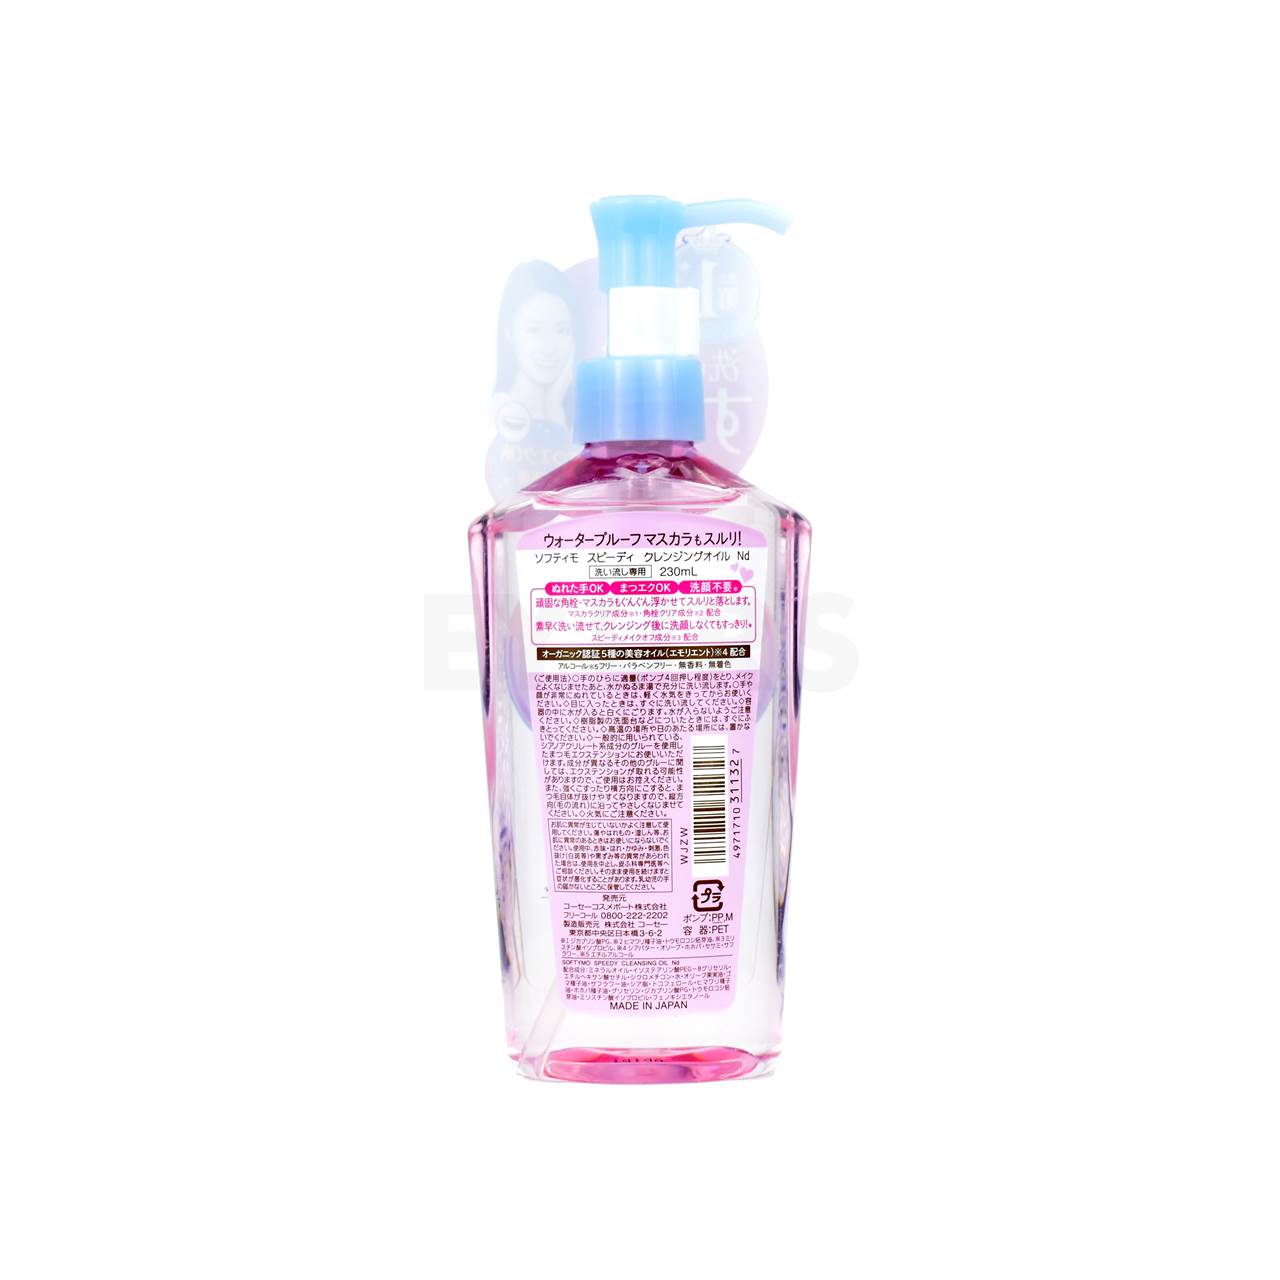 kose softymo speedy cleansing oil 230ml back of product